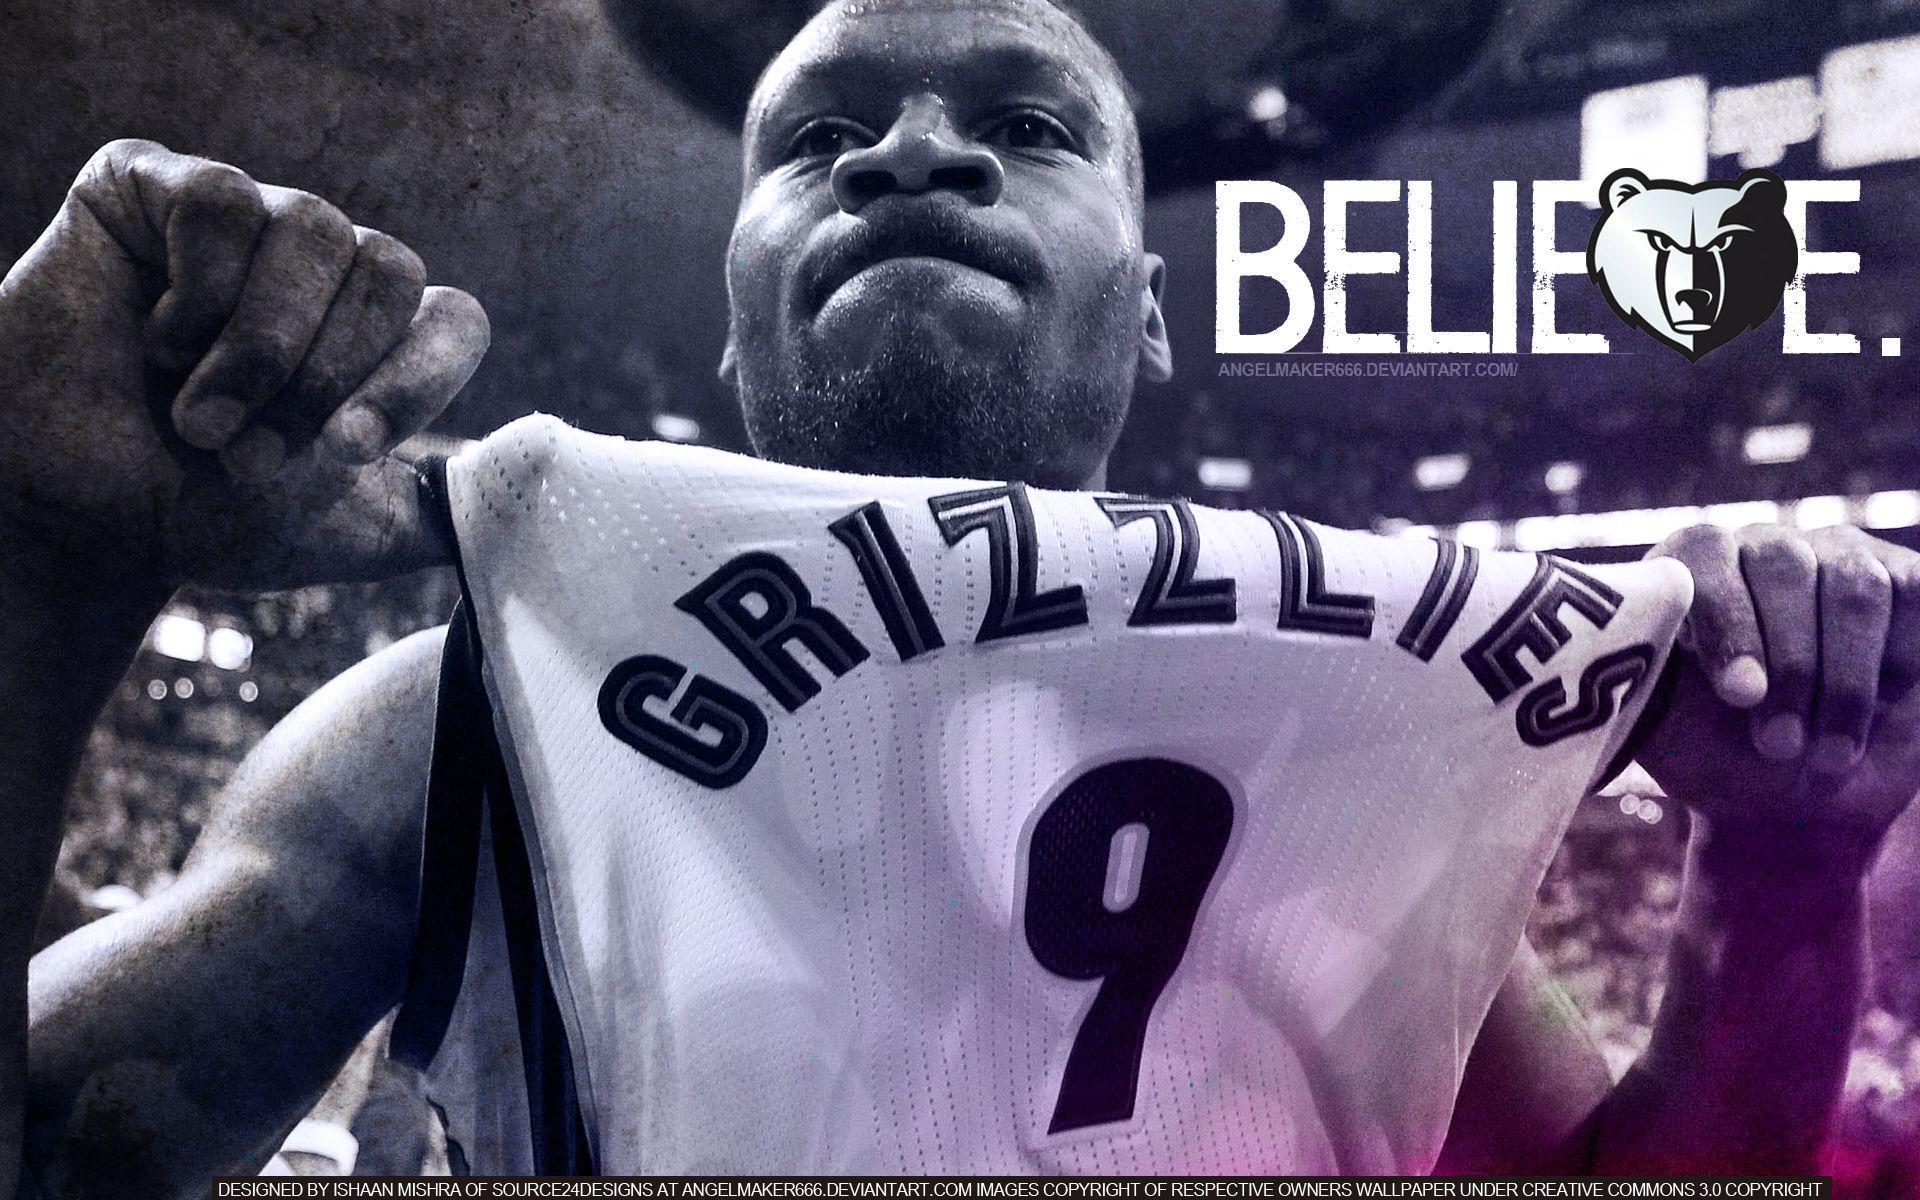 Memphis Grizzlies Wallpapers High Resolution and Quality Download